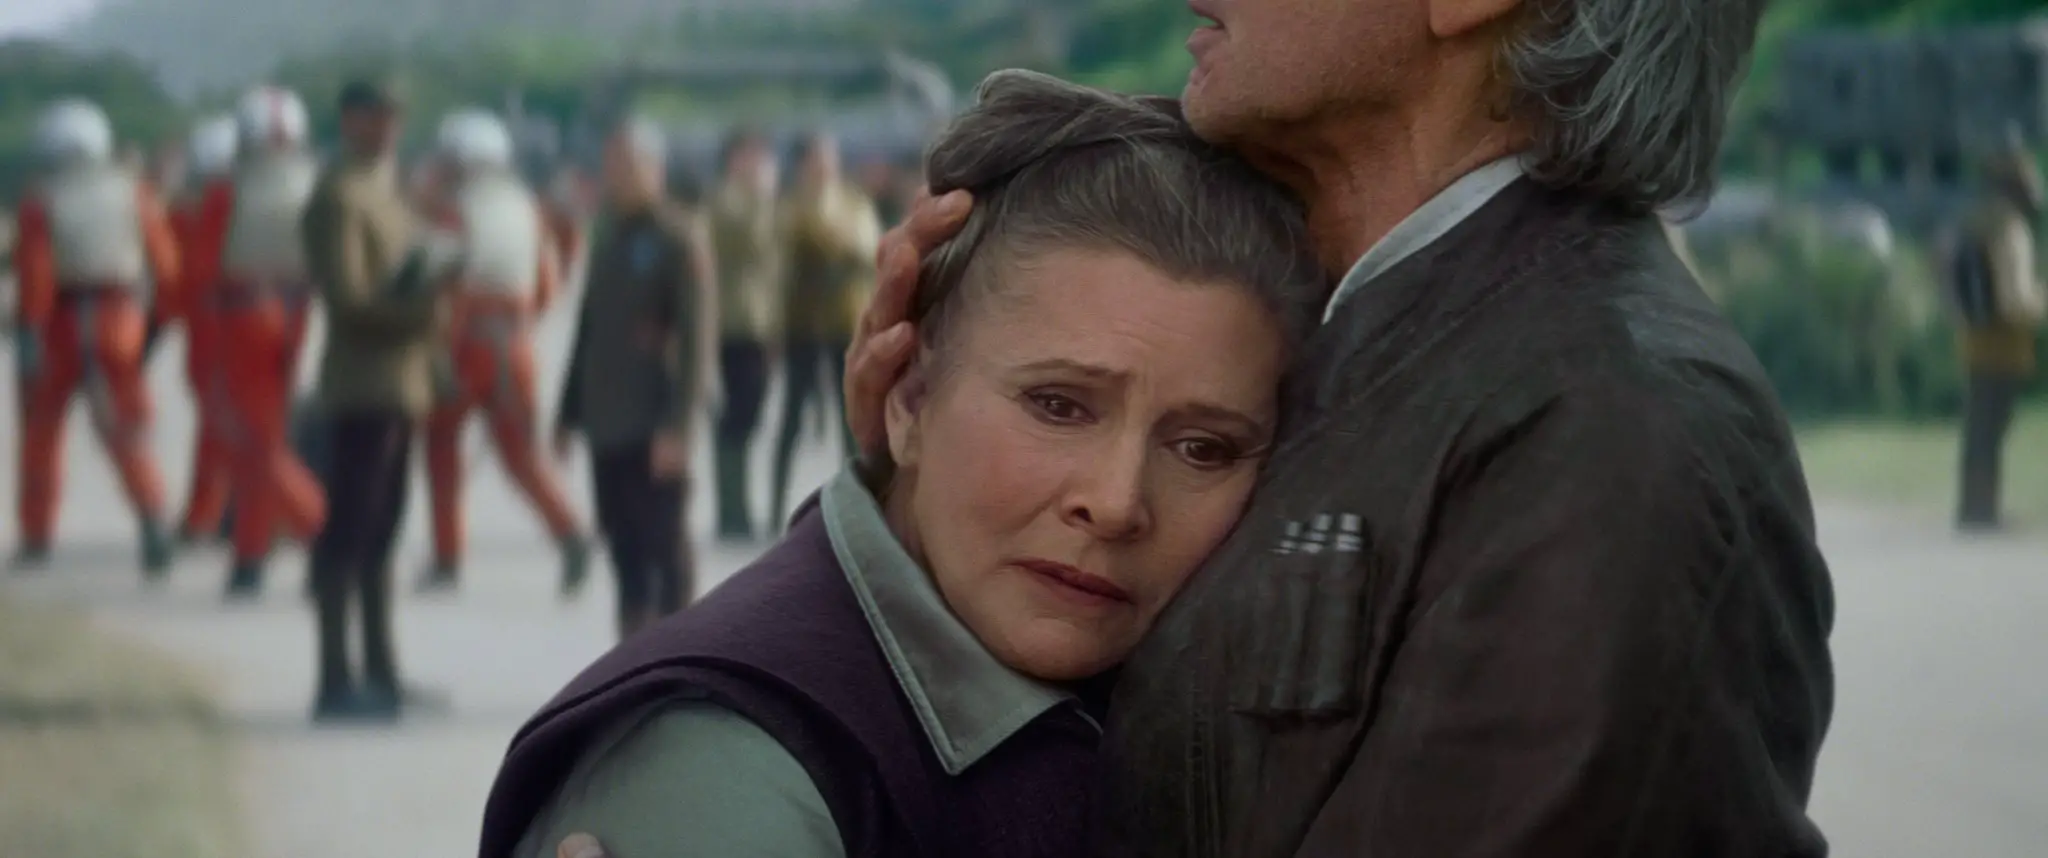 %image_alt% - Is Carrie Fisher In Star Wars Episode VIII?